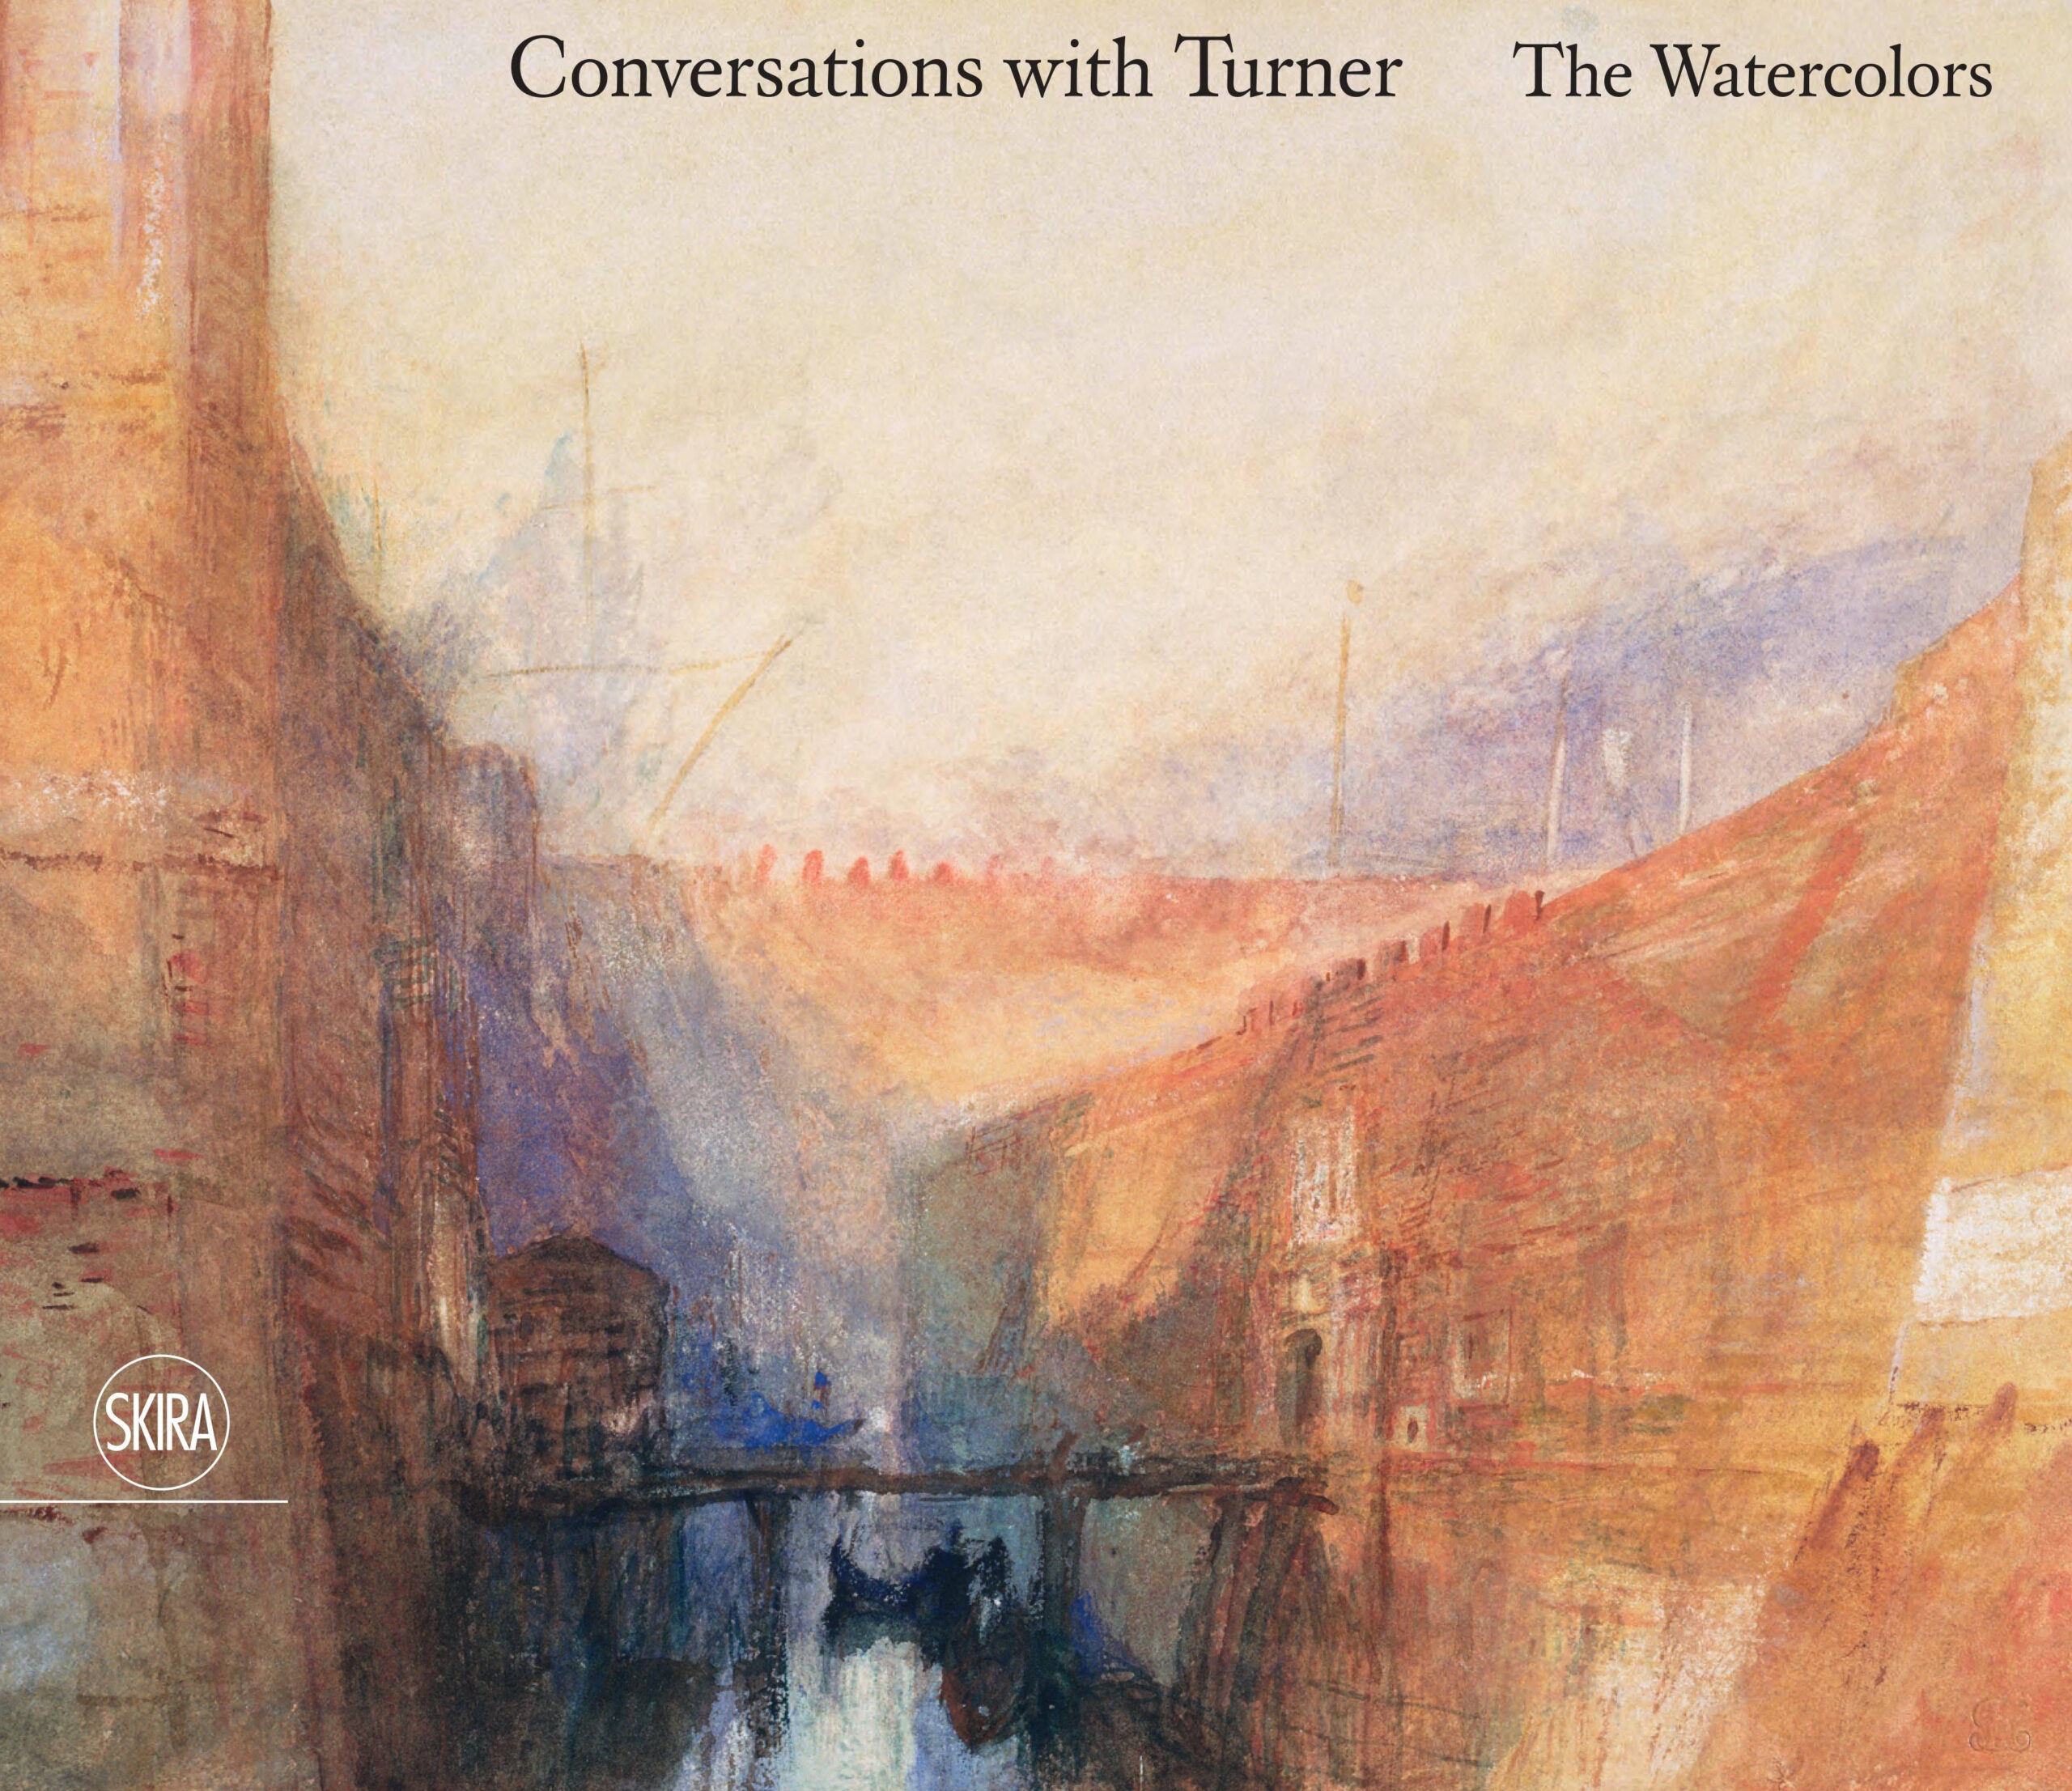 "Conversations with Turner: The Watercolors," edited by Nicholas R. Bell